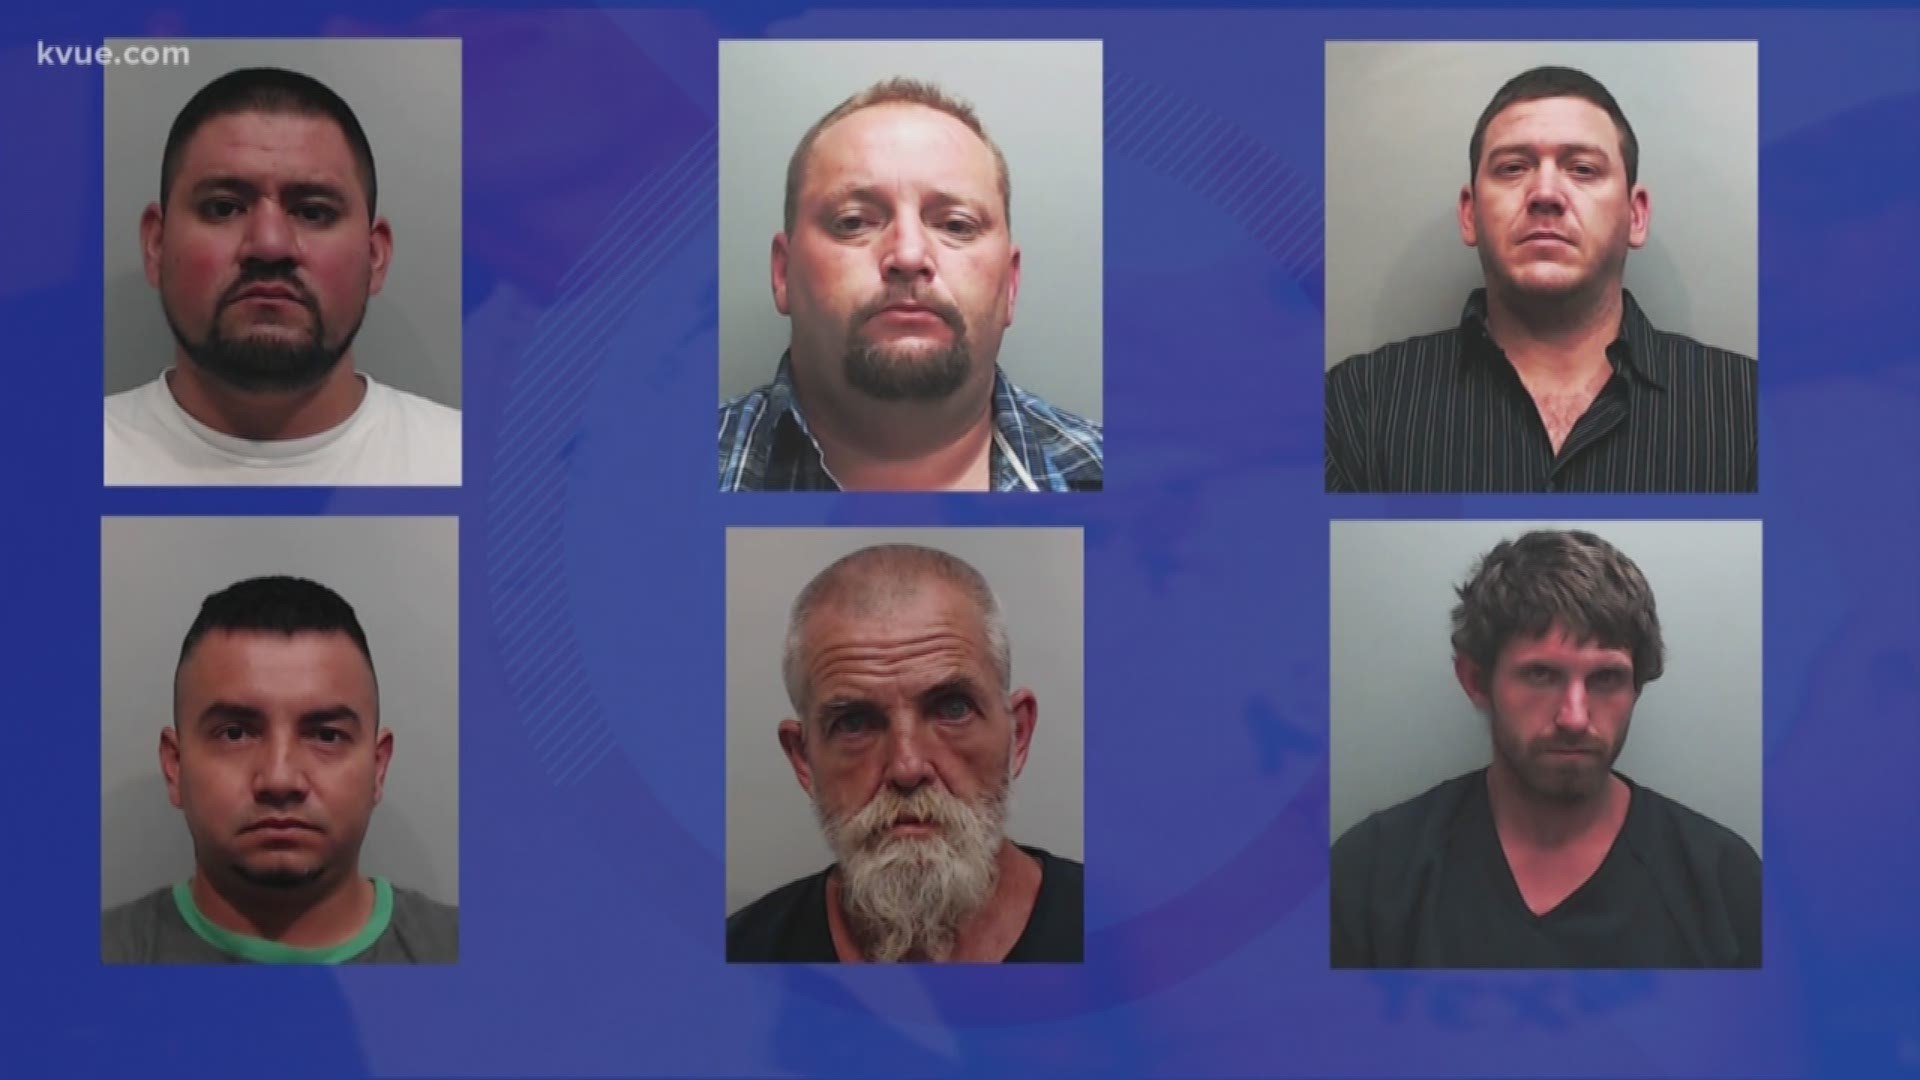 Several accused of being part of a white supremacy group will go before a Hays County judge Thursday. 18 people were indicted on a range of charges in a Central Texas crime ring bust.